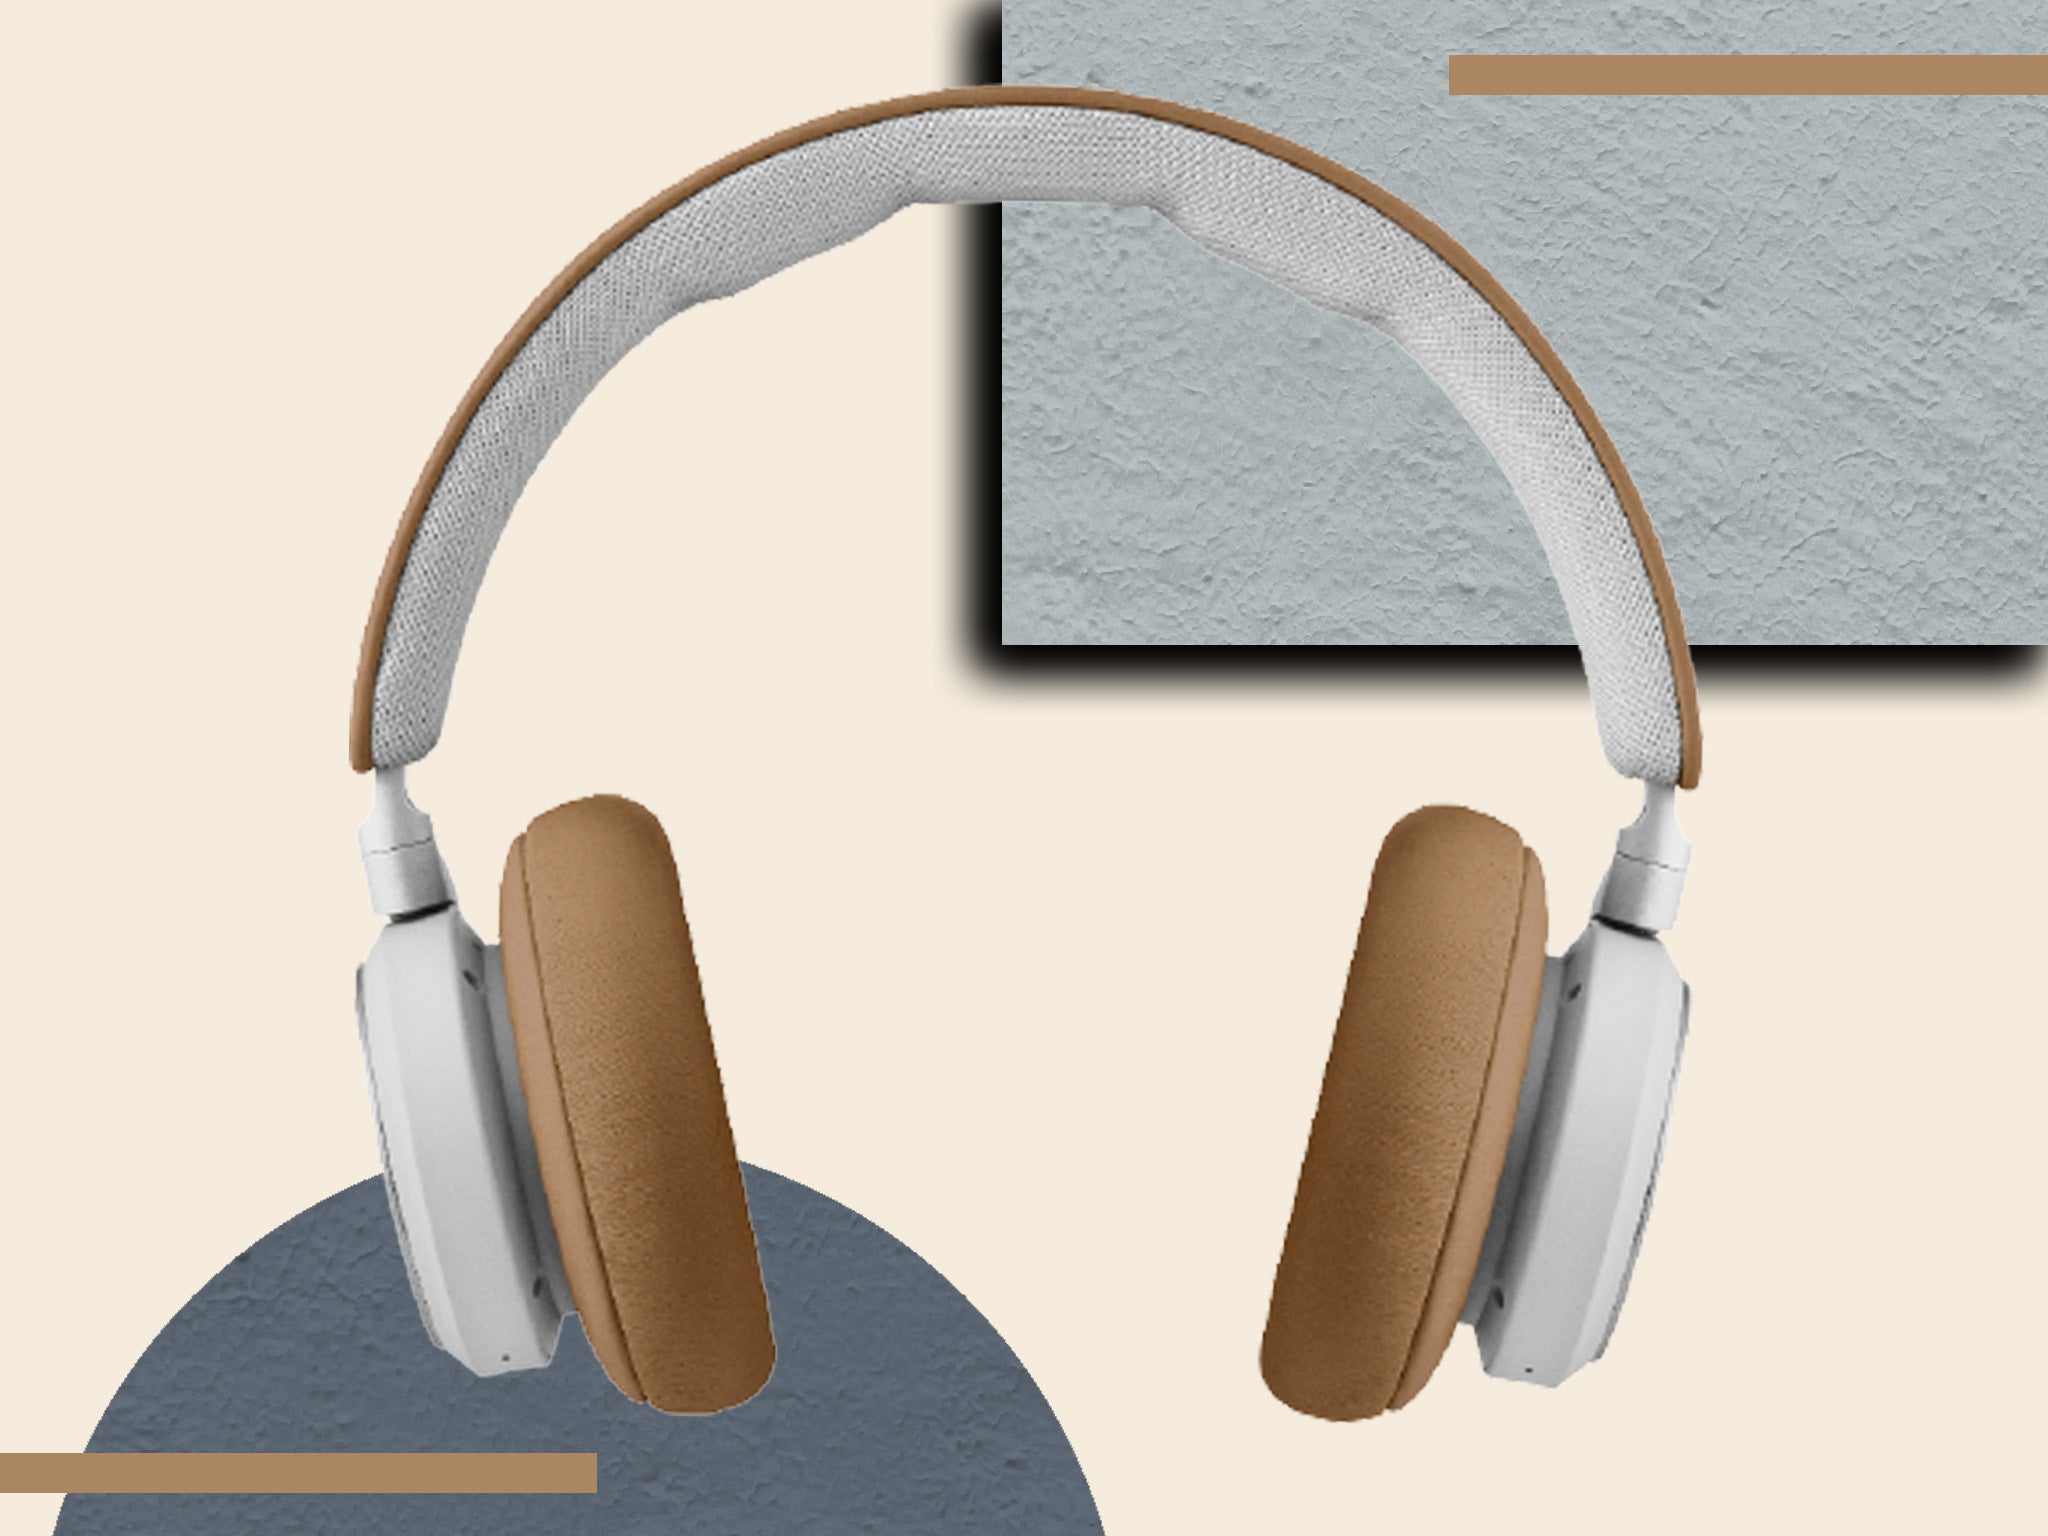 B&O Beoplay HX headphones review: Noise-cancellation, high audio